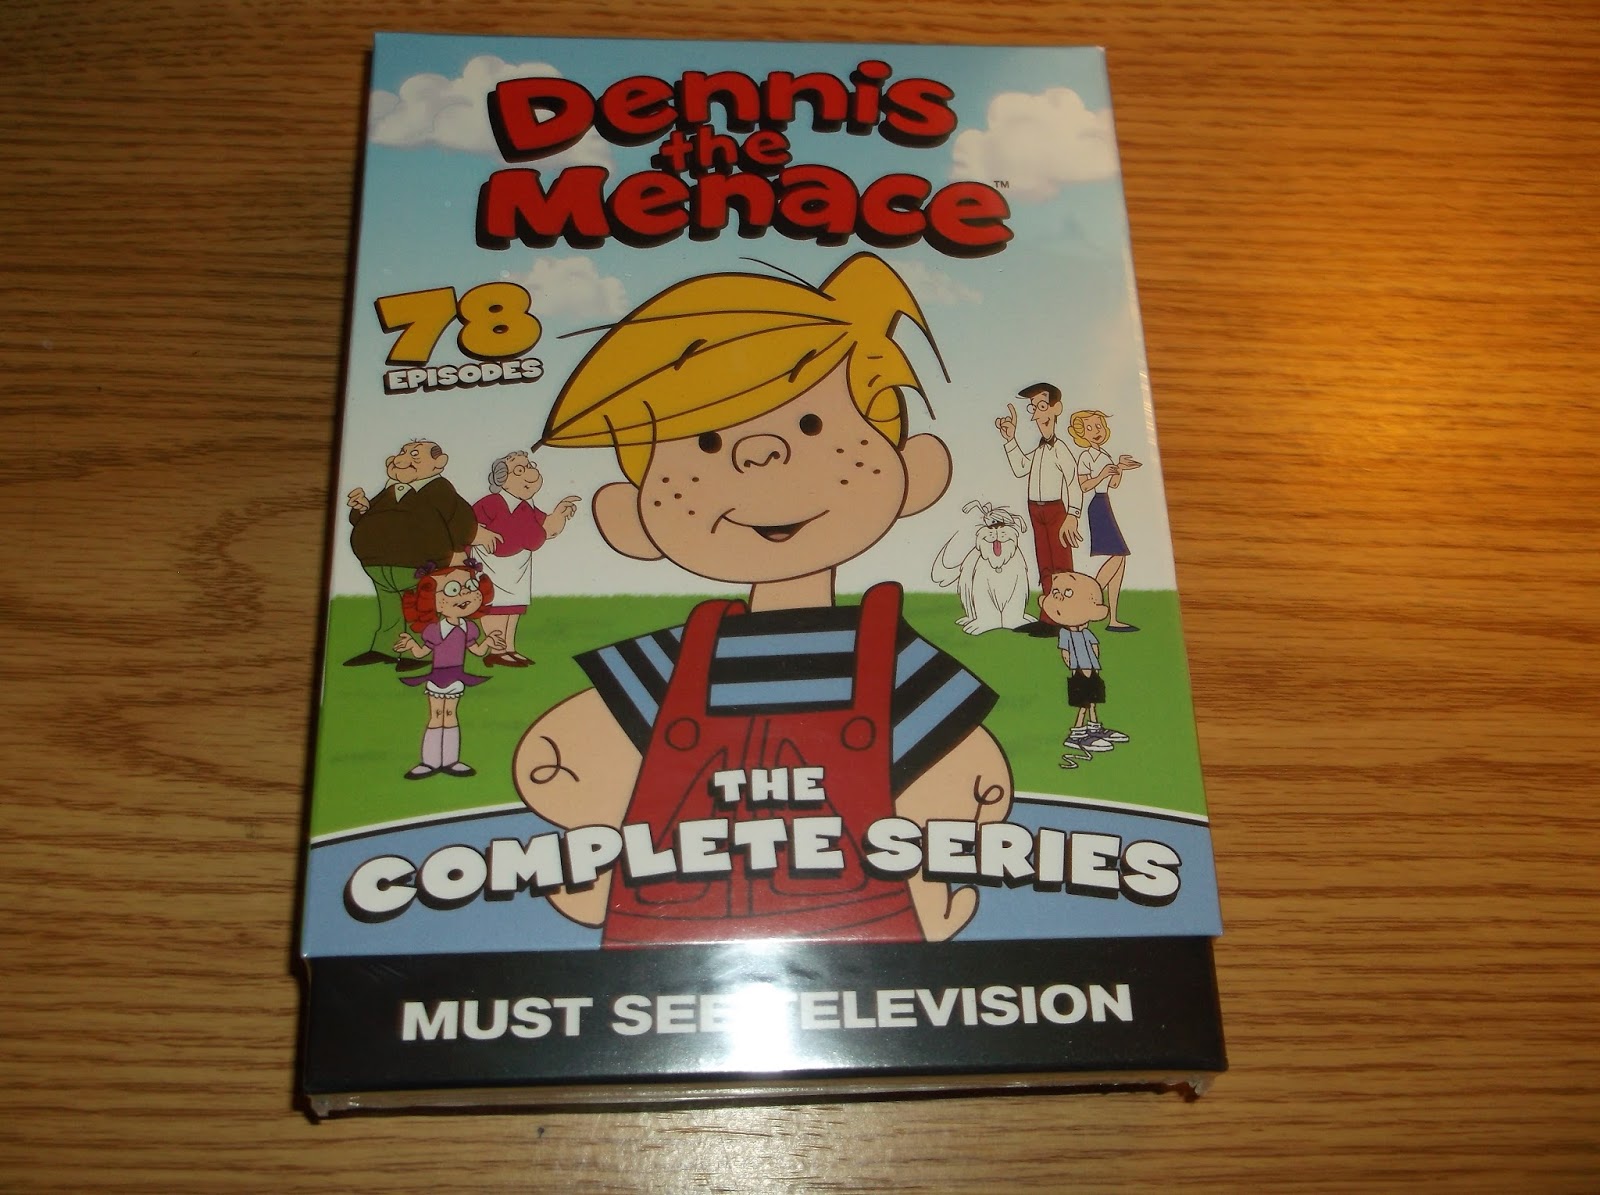 Missy's Product Reviews : Dennis the Menace: The Complete Series